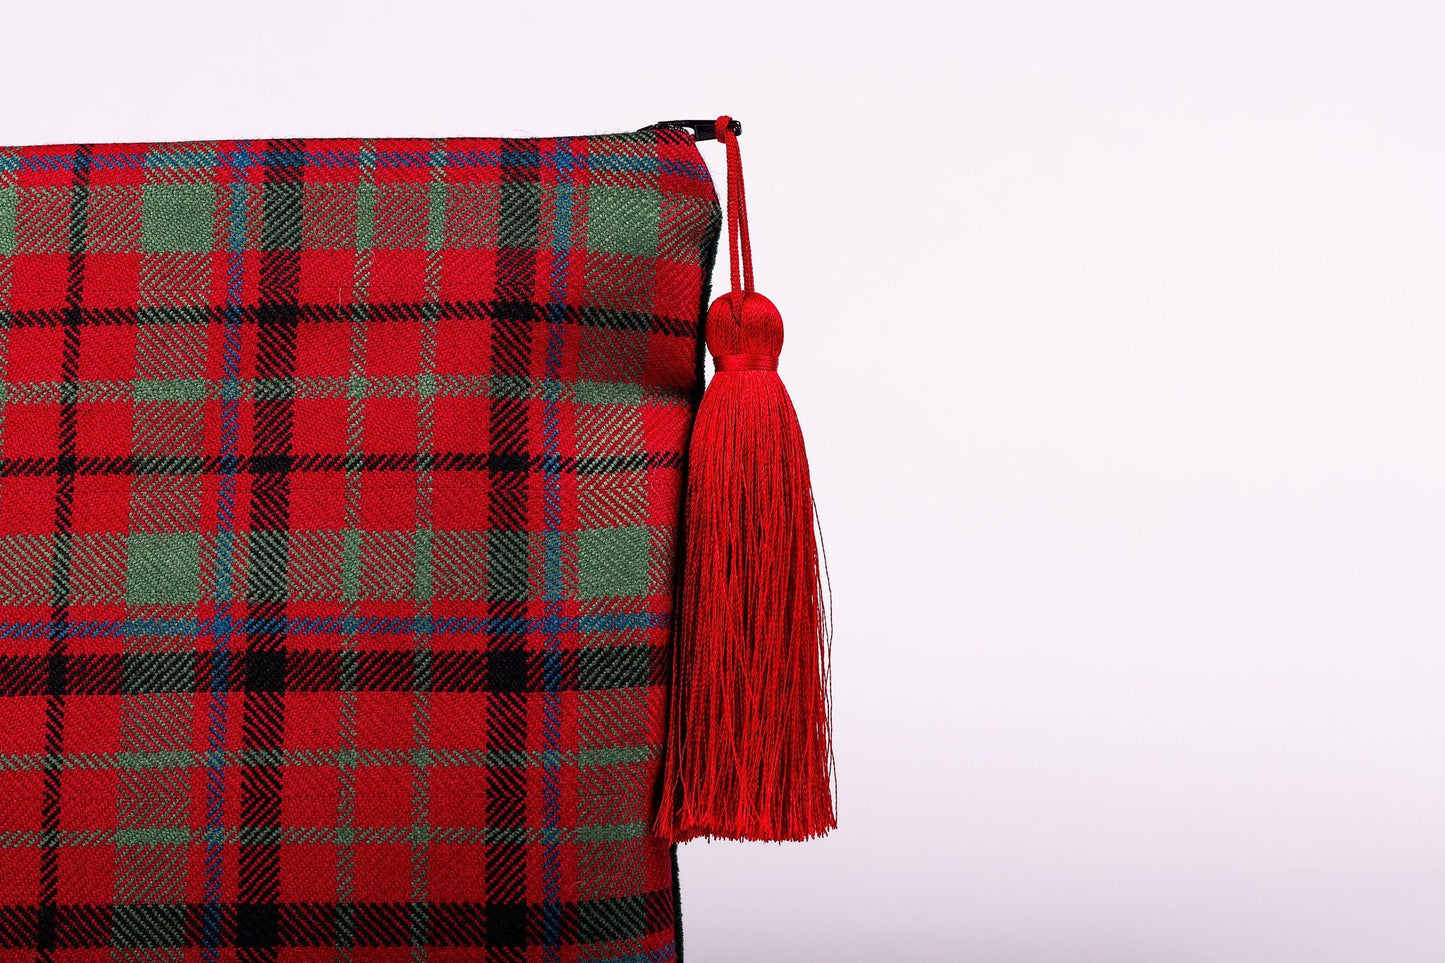 Velvet Backed Clutch Purse - YOUR OWN TARTAN - Lined with Liberty Fabrics